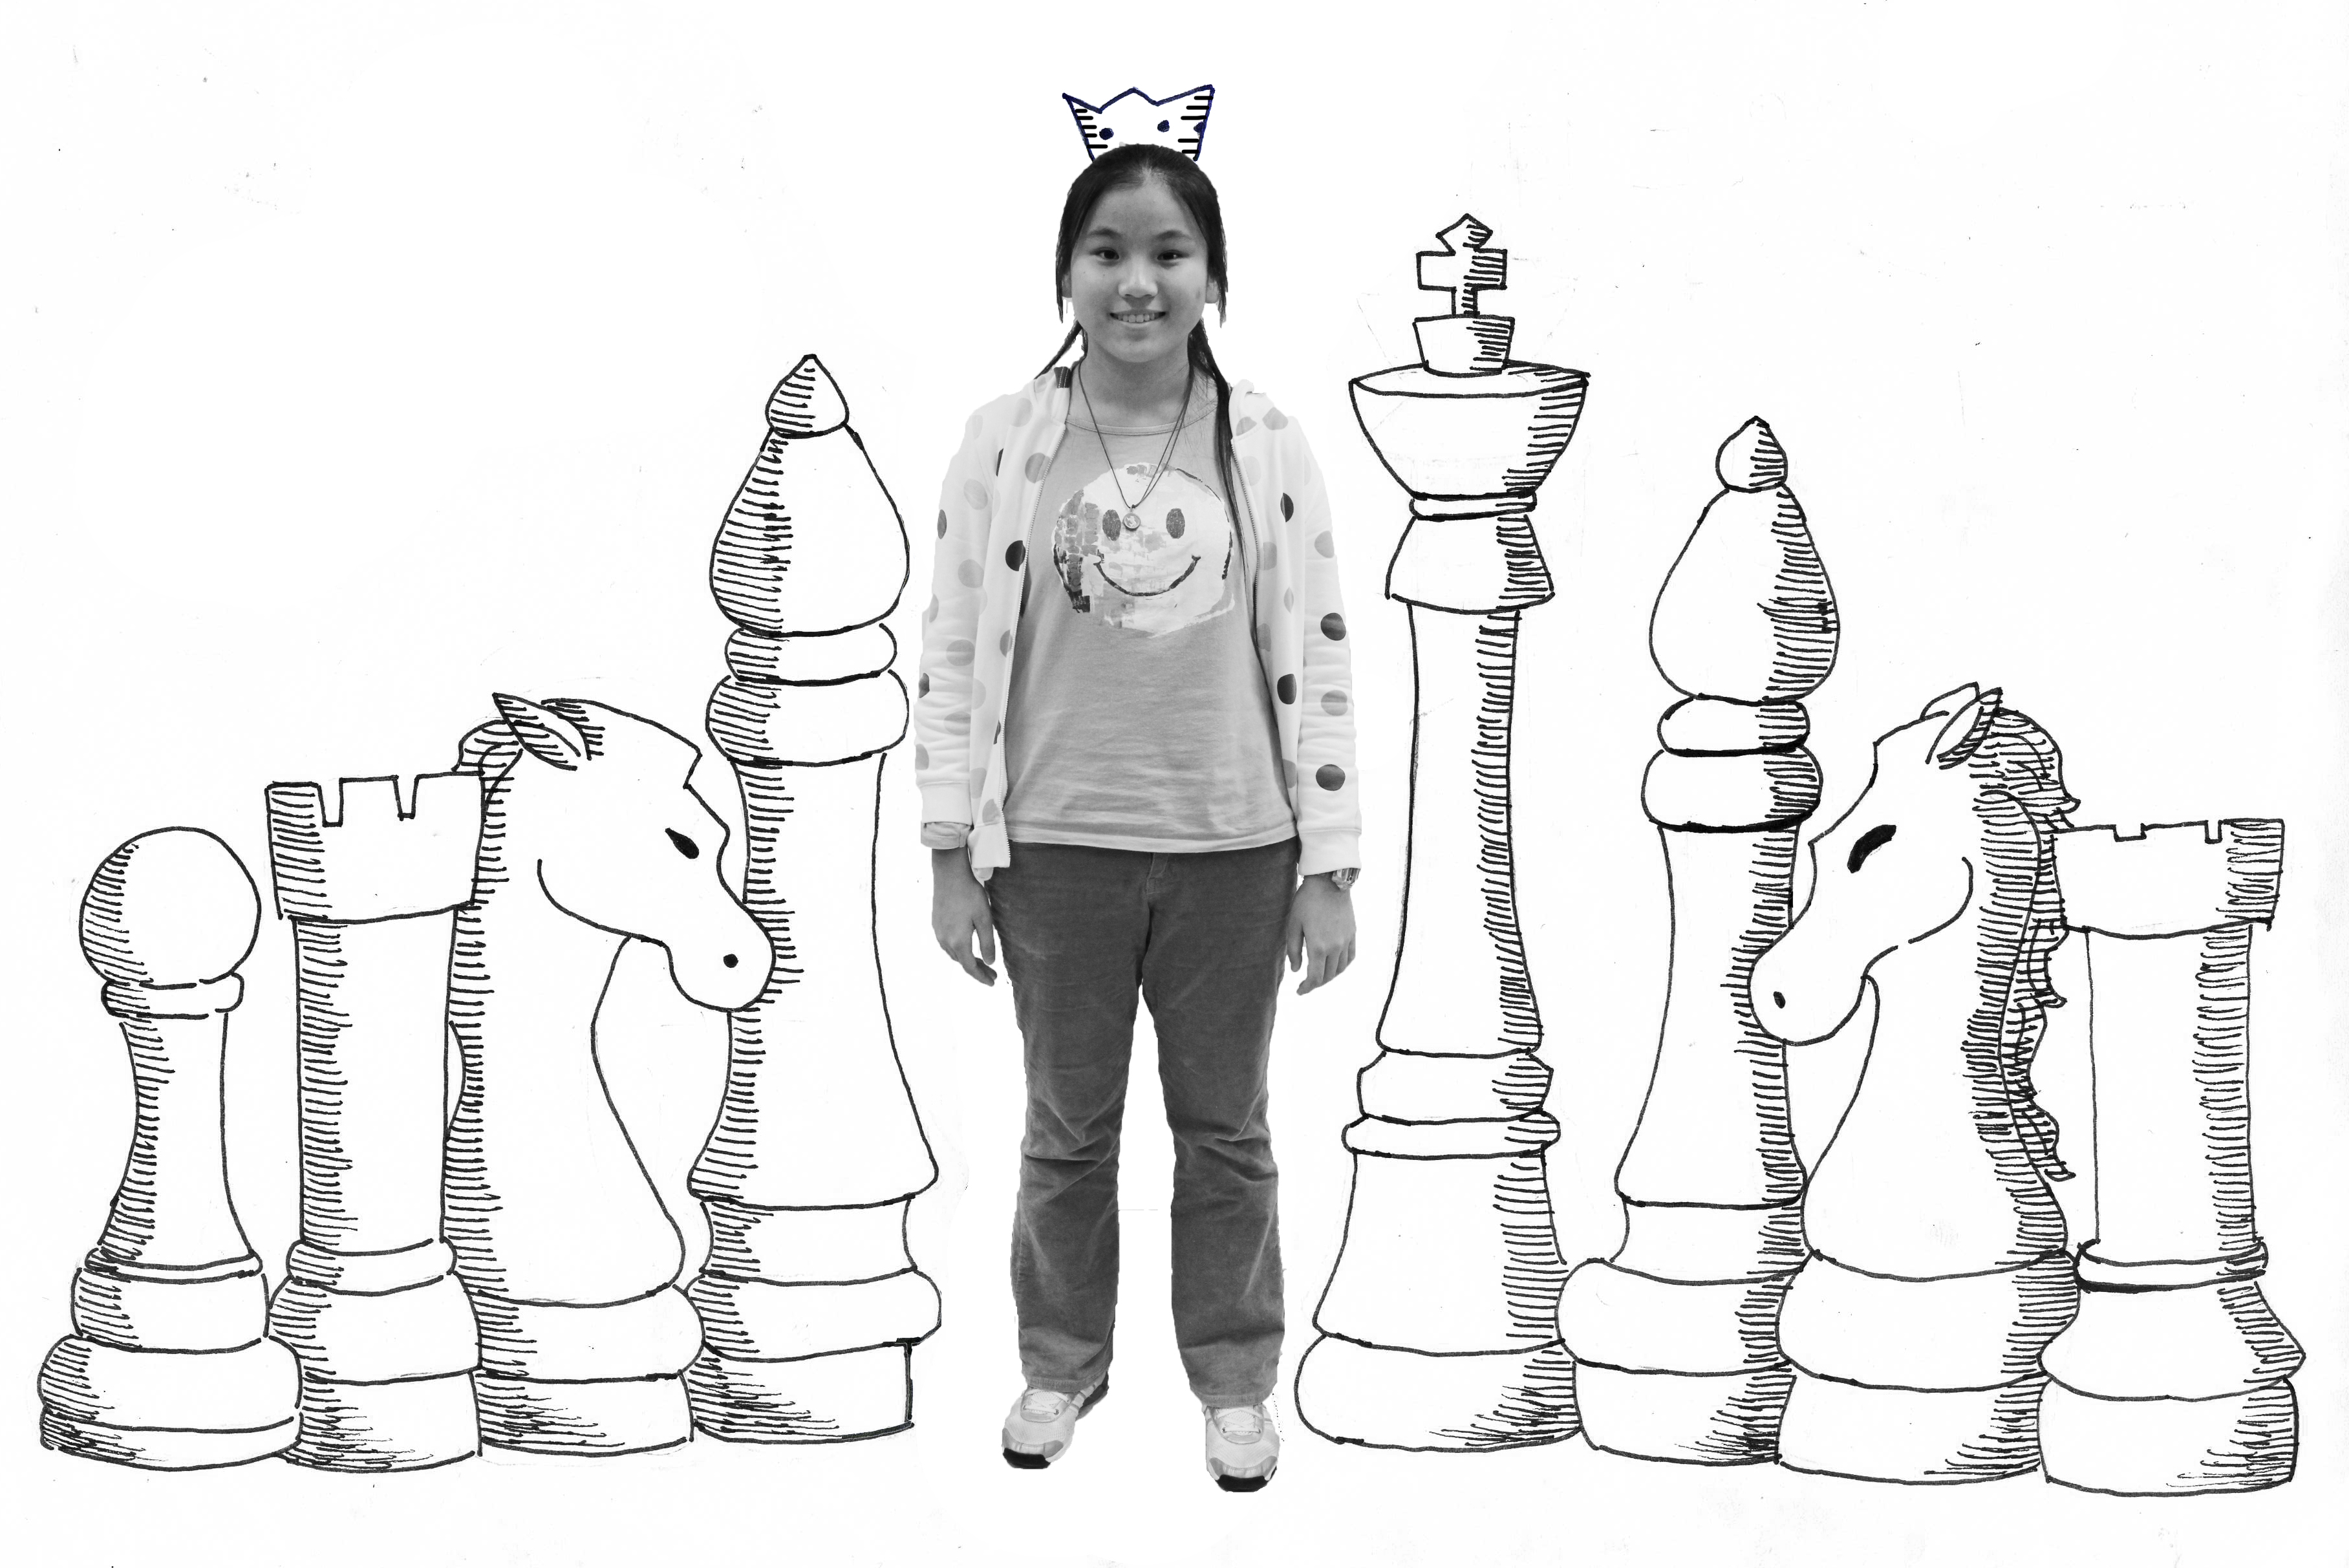 Shao shows off her moves in chess tournament